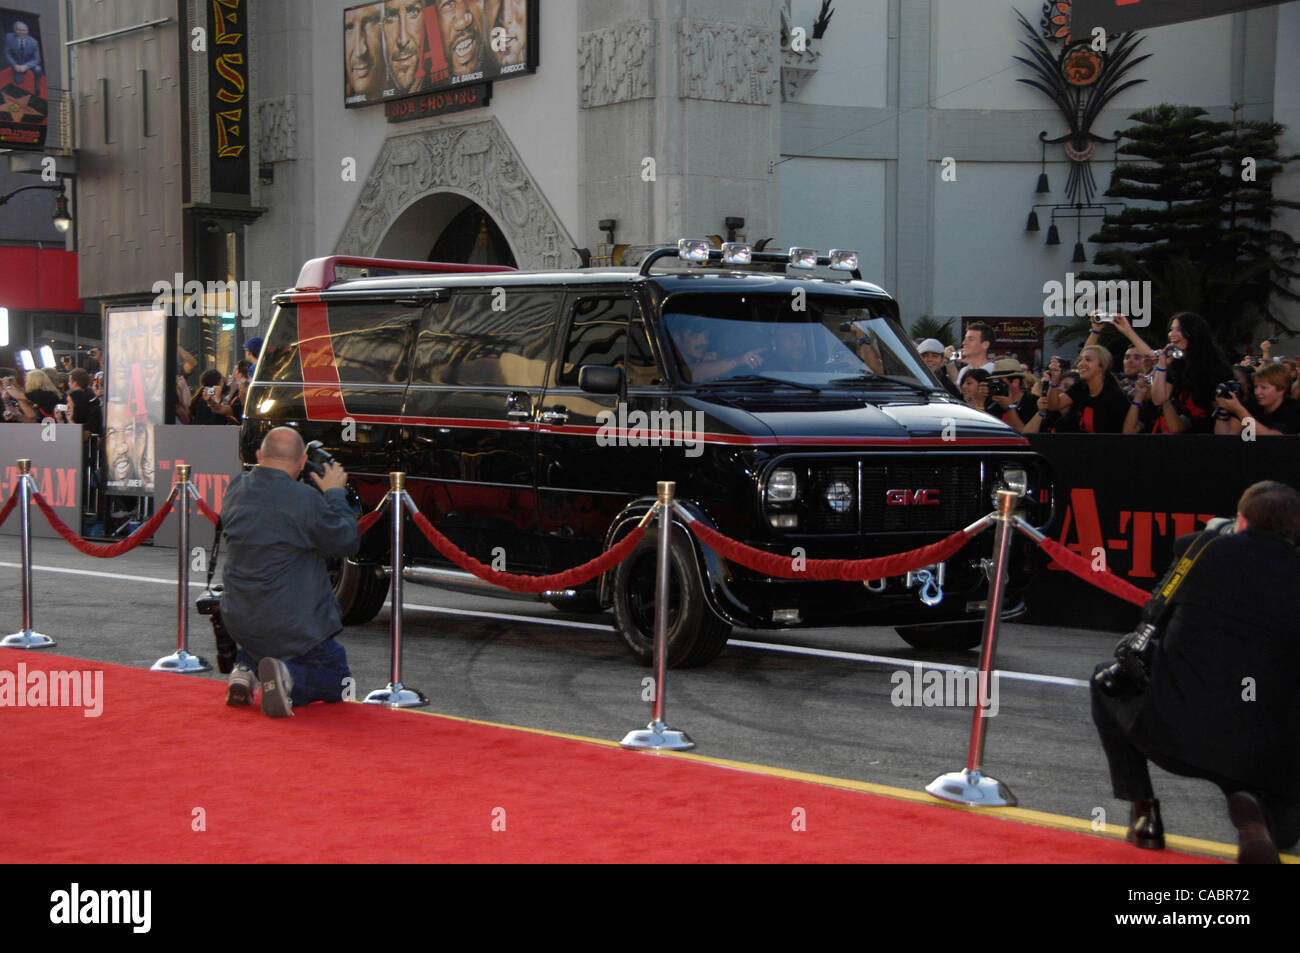 Jun. 03, 2010 - Hollywood, California, U.S. - A -Team van during the premiere of the new movie from 20th Century Fox THE A-TEAM, held at Grauman's Chinese Theatre, on June 3, 2010, in Los Angeles.. 2010.K65126MGE(Credit Image: Â© Michael Germana/Globe Photos/ZUMApress.com) Stock Photo